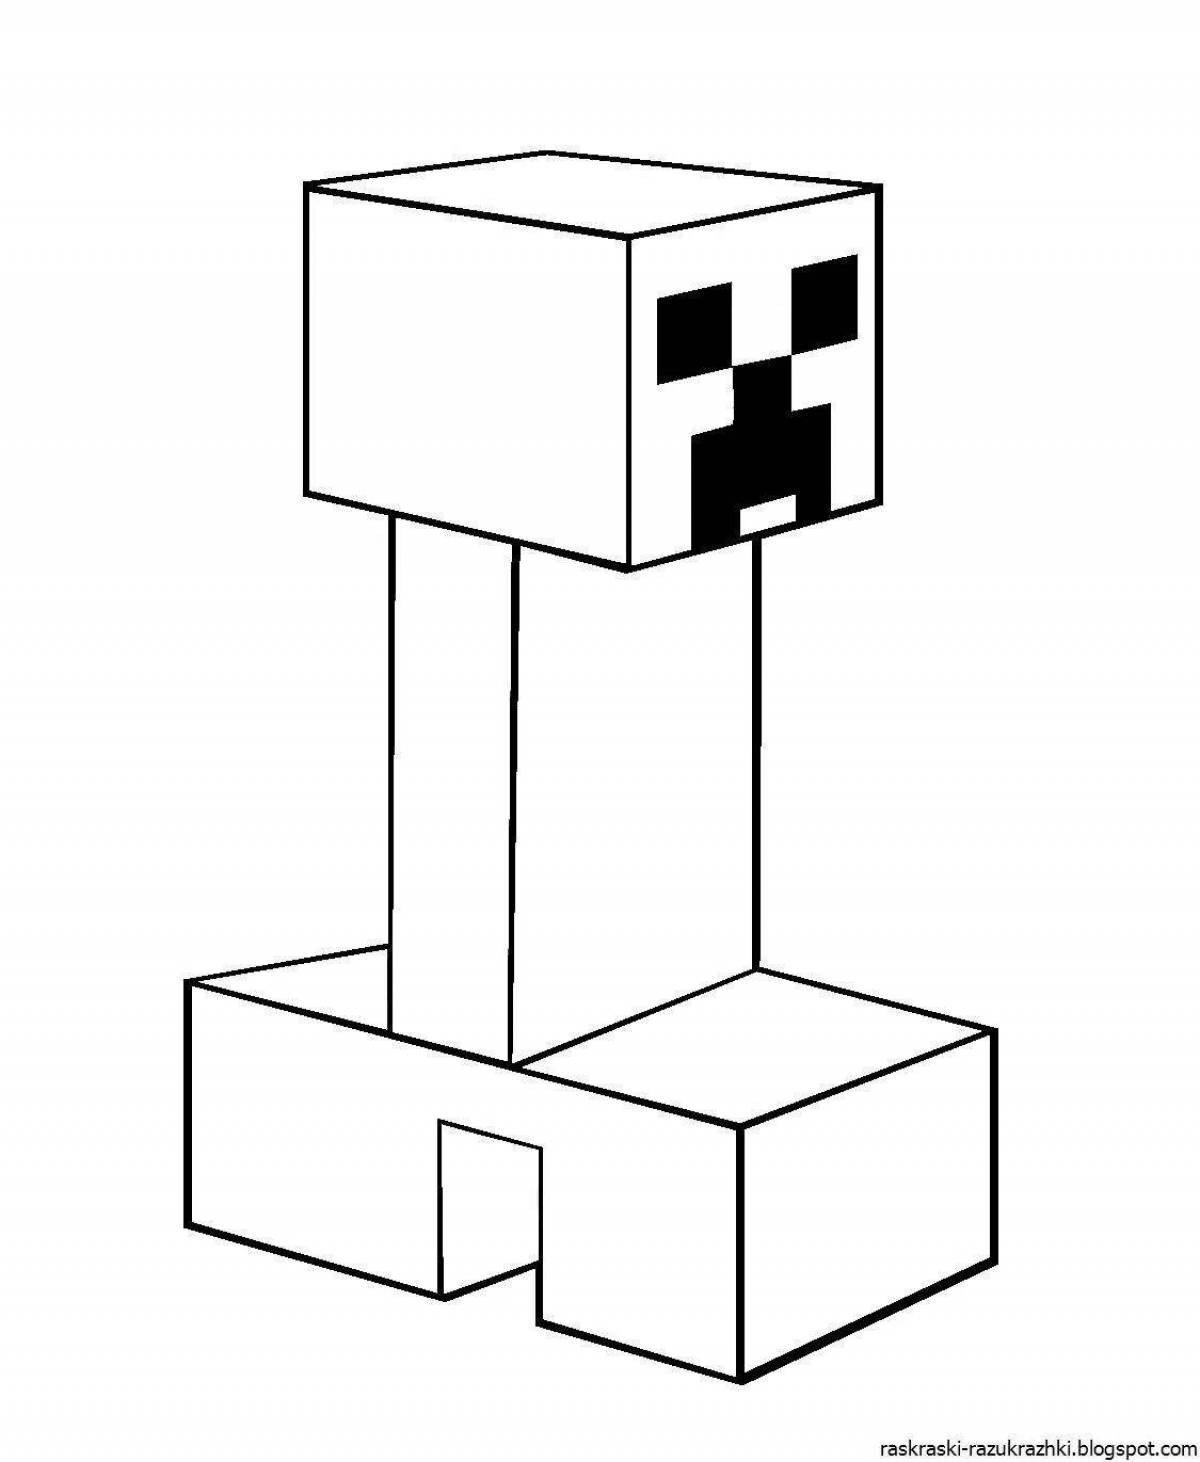 Adorable coloring for minecraft fans